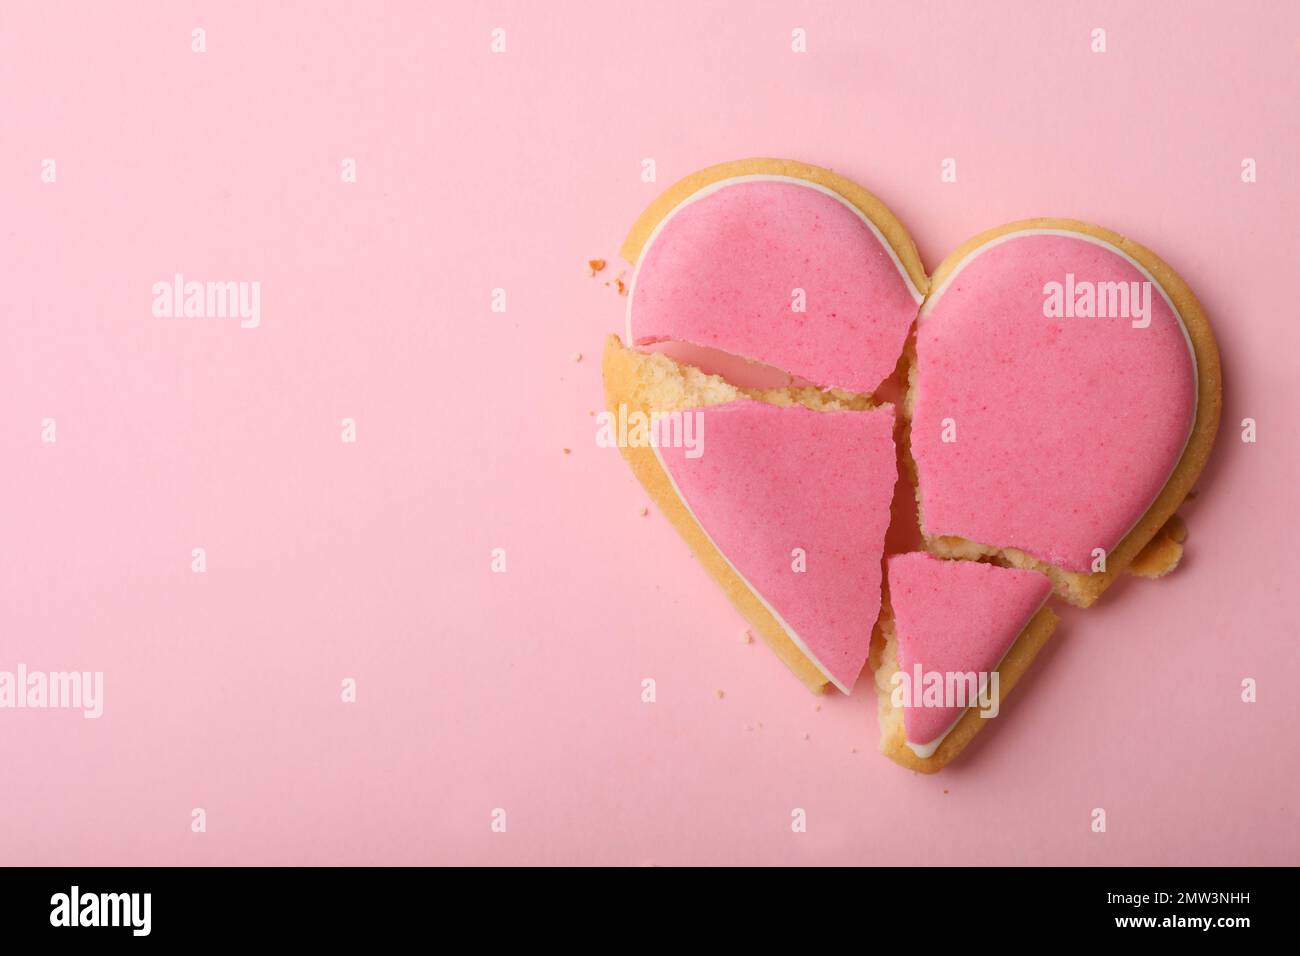 Many Small Wooden Hearts Flying To The Sides Shattered Feelings Broken Love  Love Concept On Pink Paper Background With Copy Space Stock Photo -  Download Image Now - iStock